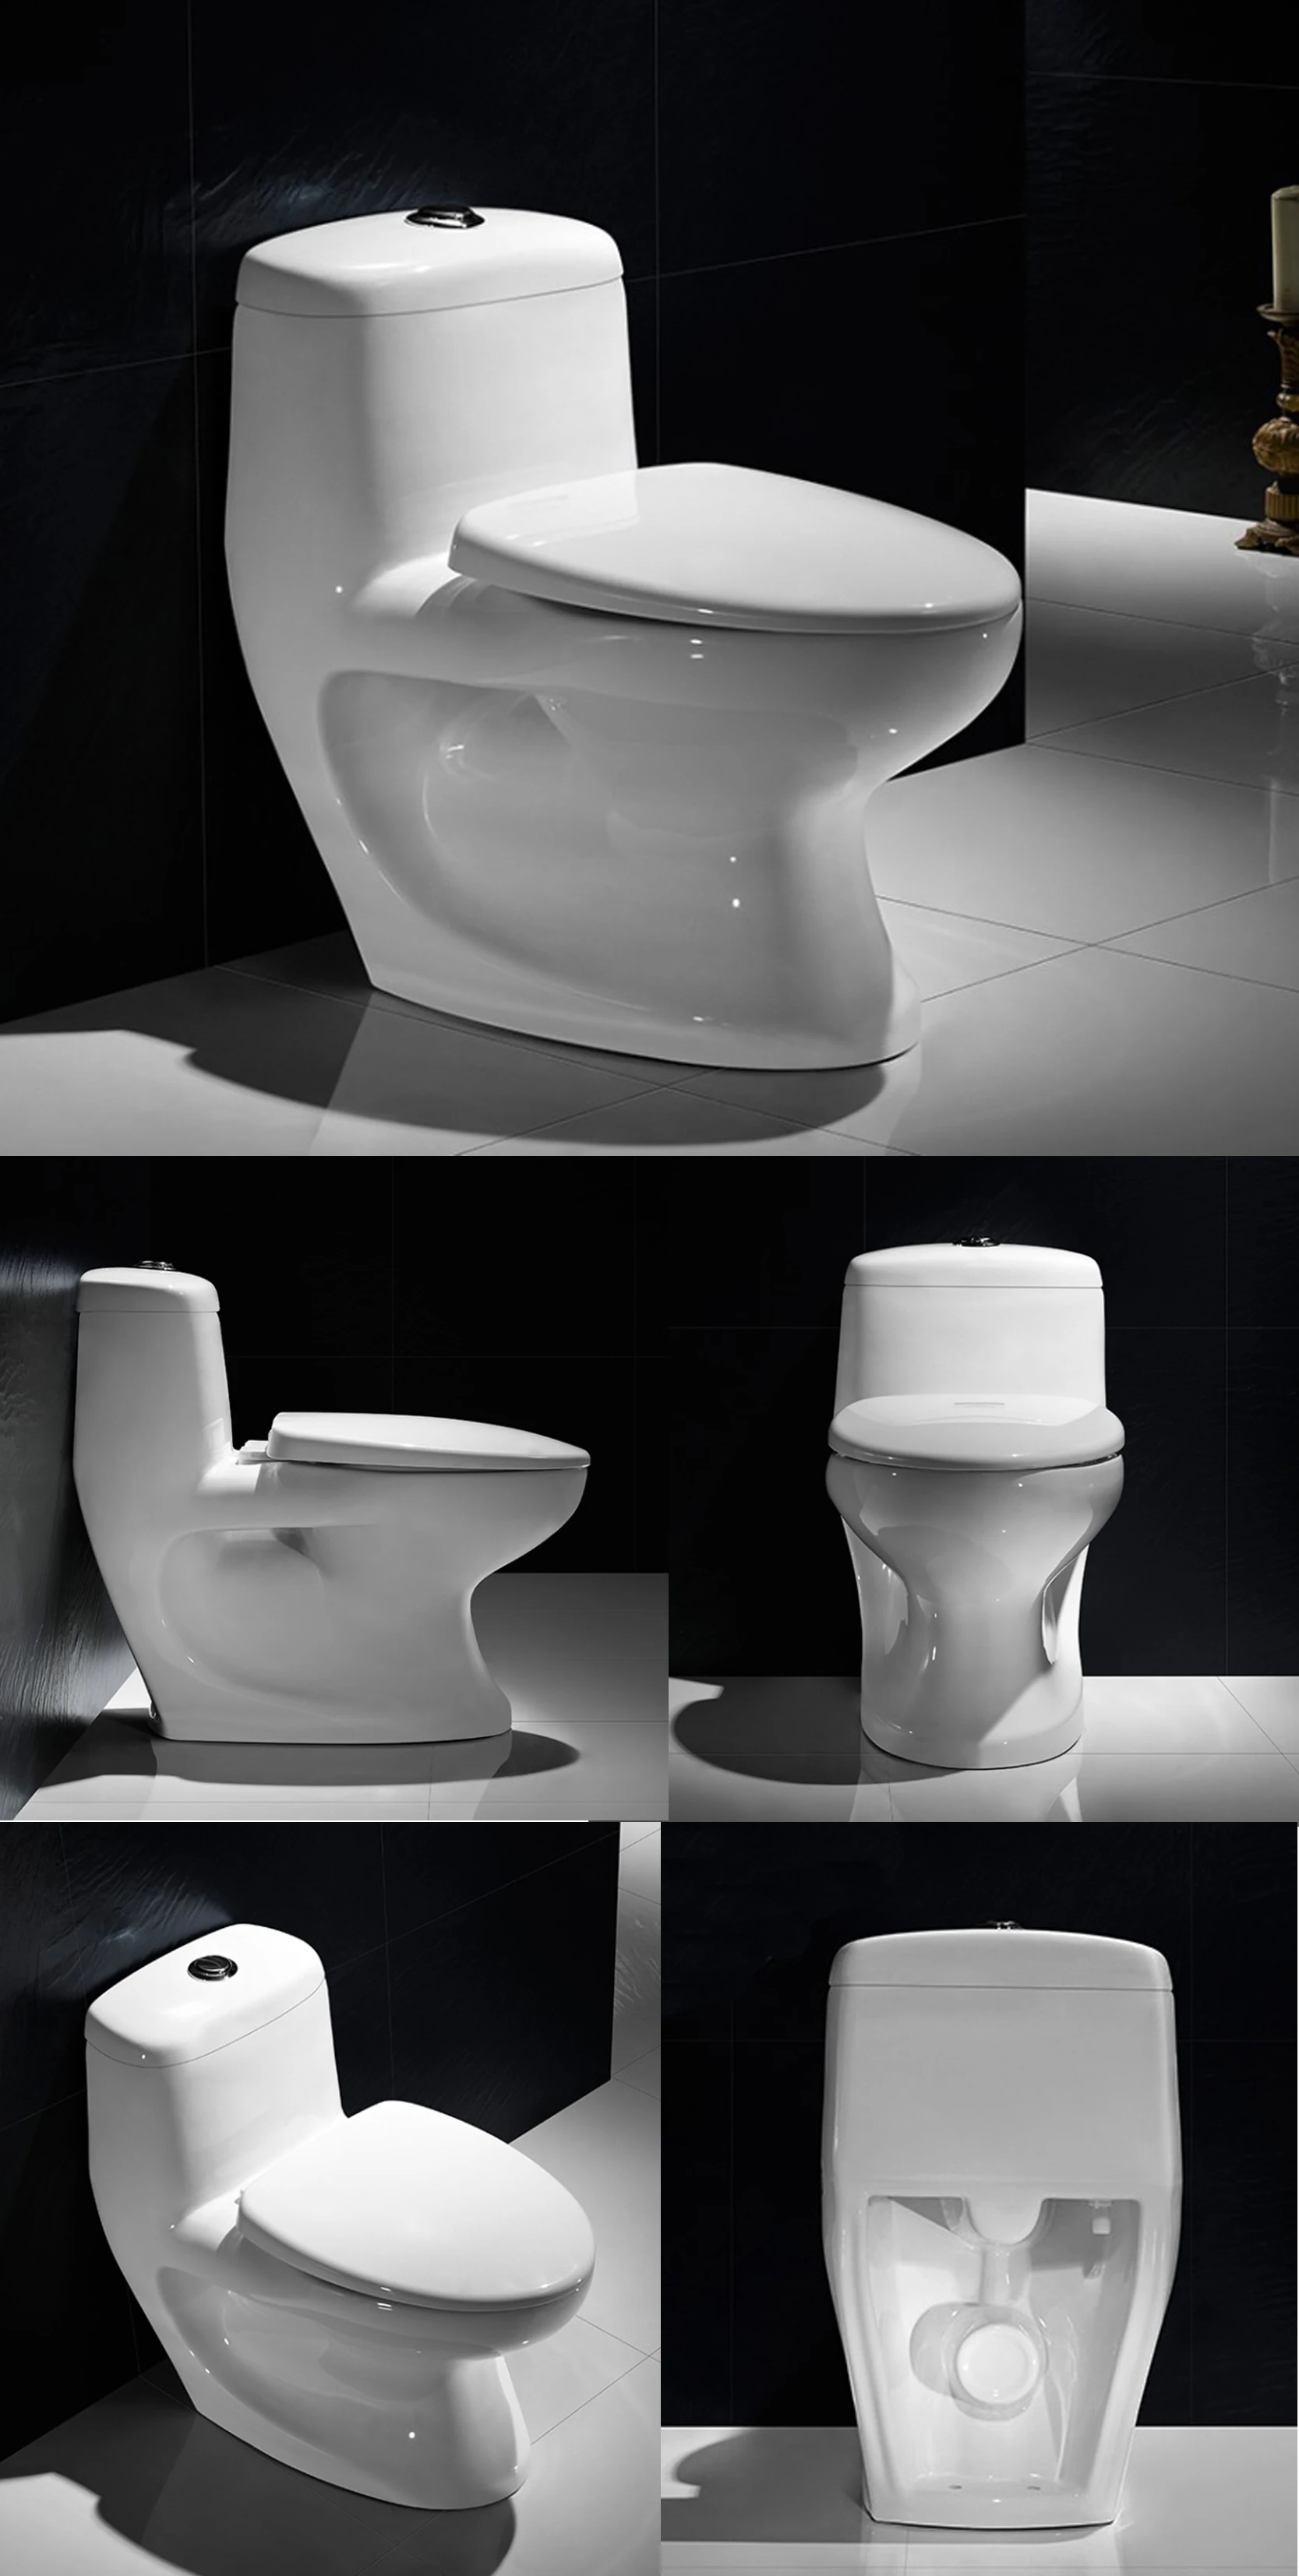 JOININ Hot sell High quality Sanitary Ware bathroom types wc toilet JY1107